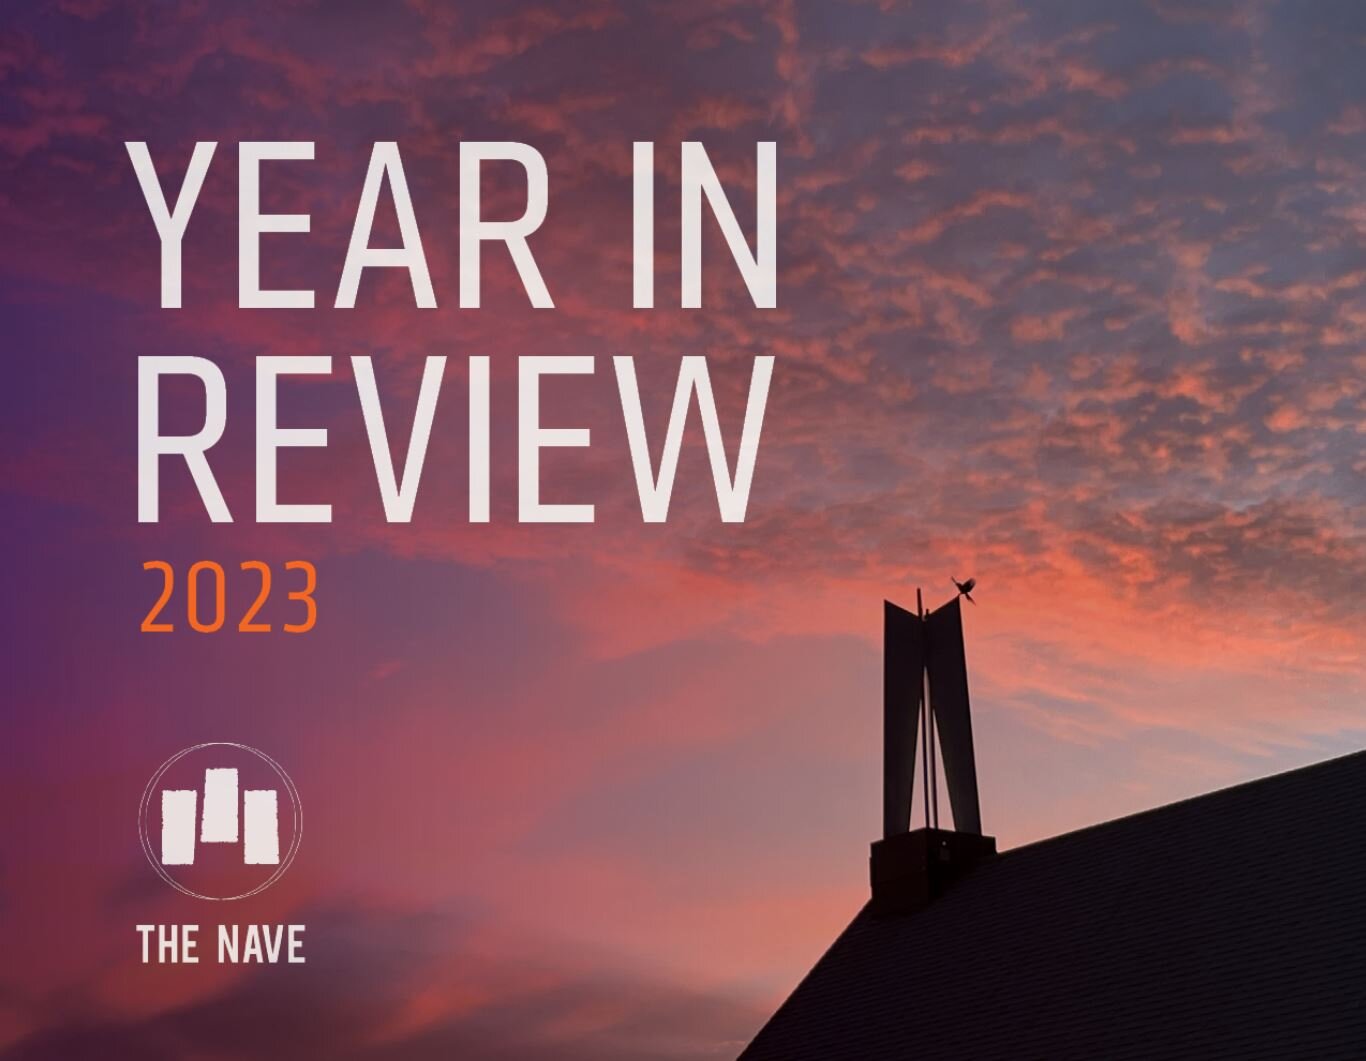 Thank you to everyone who joined us at The Nave in 2023. Our latest Year in Review document is now live on our website: https://www.thenavespenard.com/year-in-review/ 
We would like to thank our funders, collaborators, event hosts, and local artists 